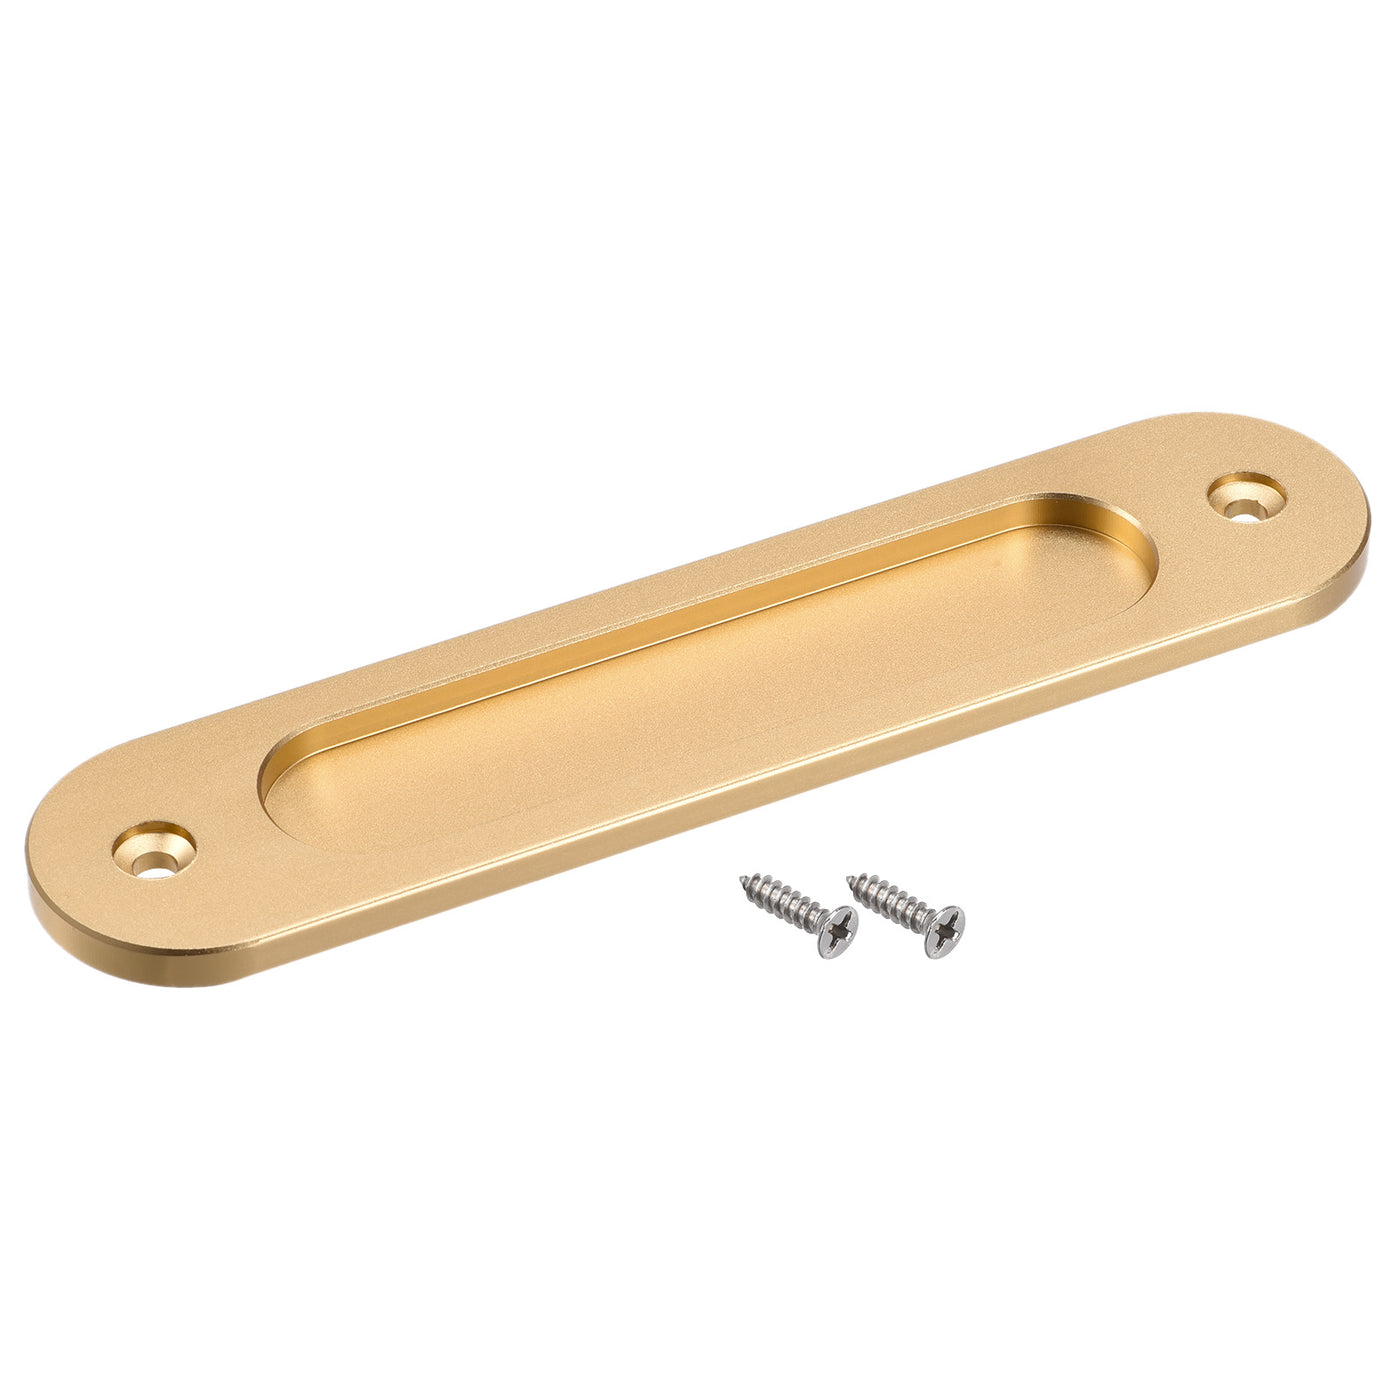 uxcell Uxcell Finger Flush Pull Handle 180x40x5.7mm Oval for Drawer Door Matte Gold